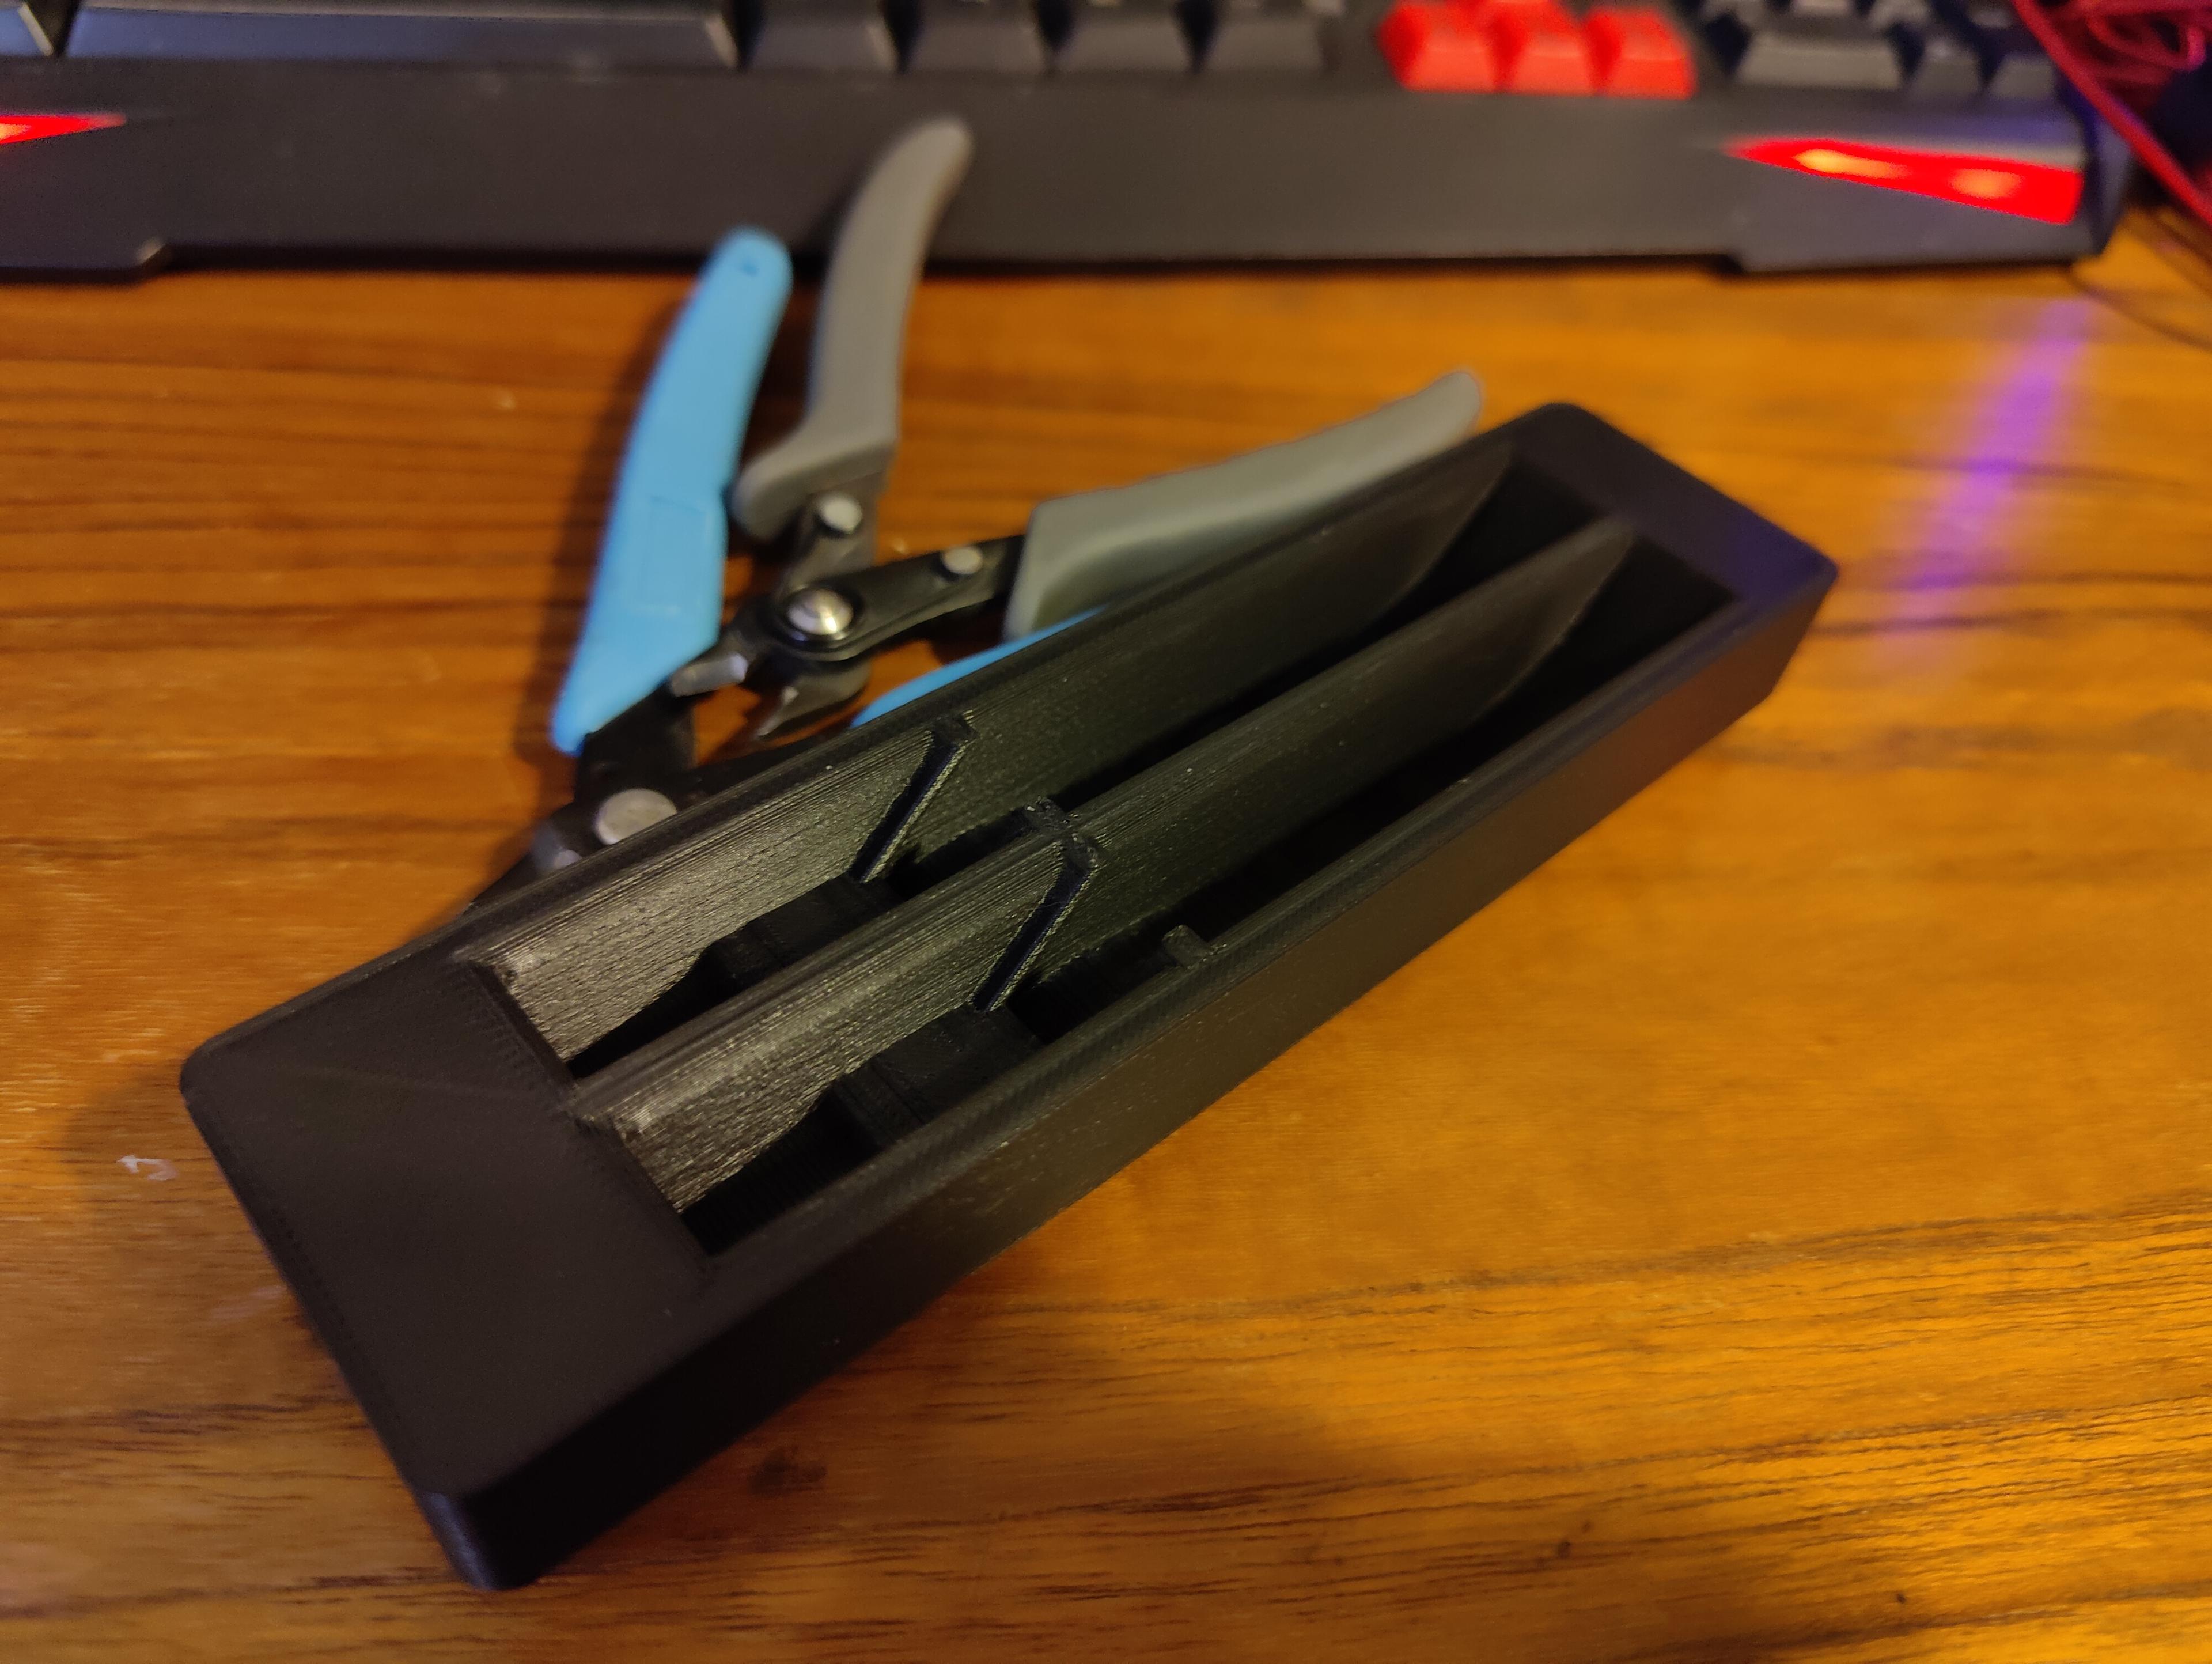 Gridfinity 2x Side Nippers (1x4); fits in a drawer! 3d model